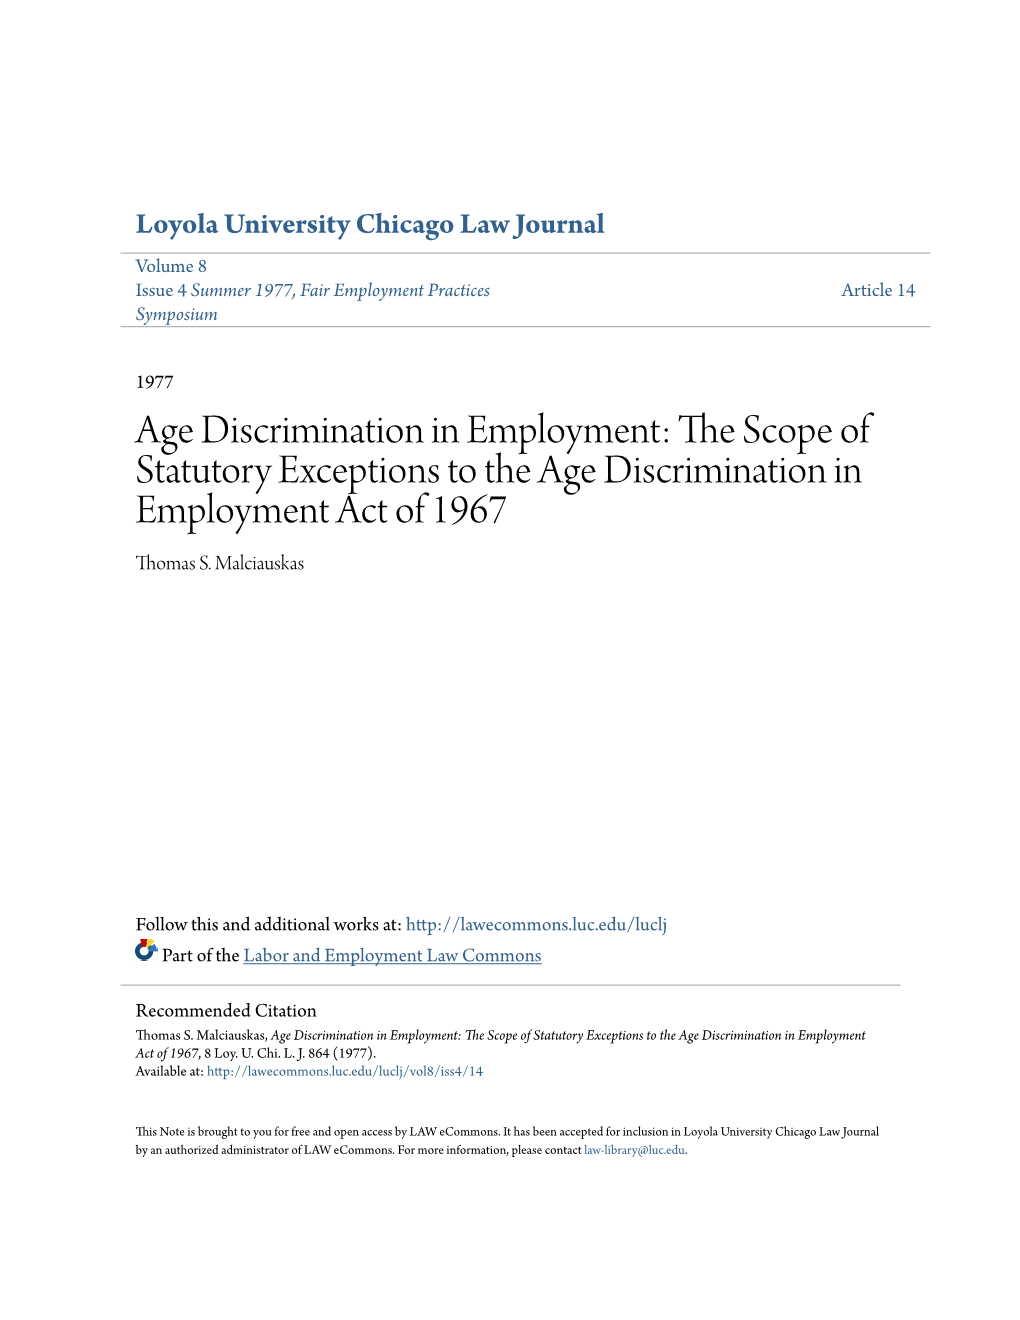 Age Discrimination in Employment: the Scope of Statutory Exceptions to the Age Discrimination in Employment Act of 1967, 8 Loy